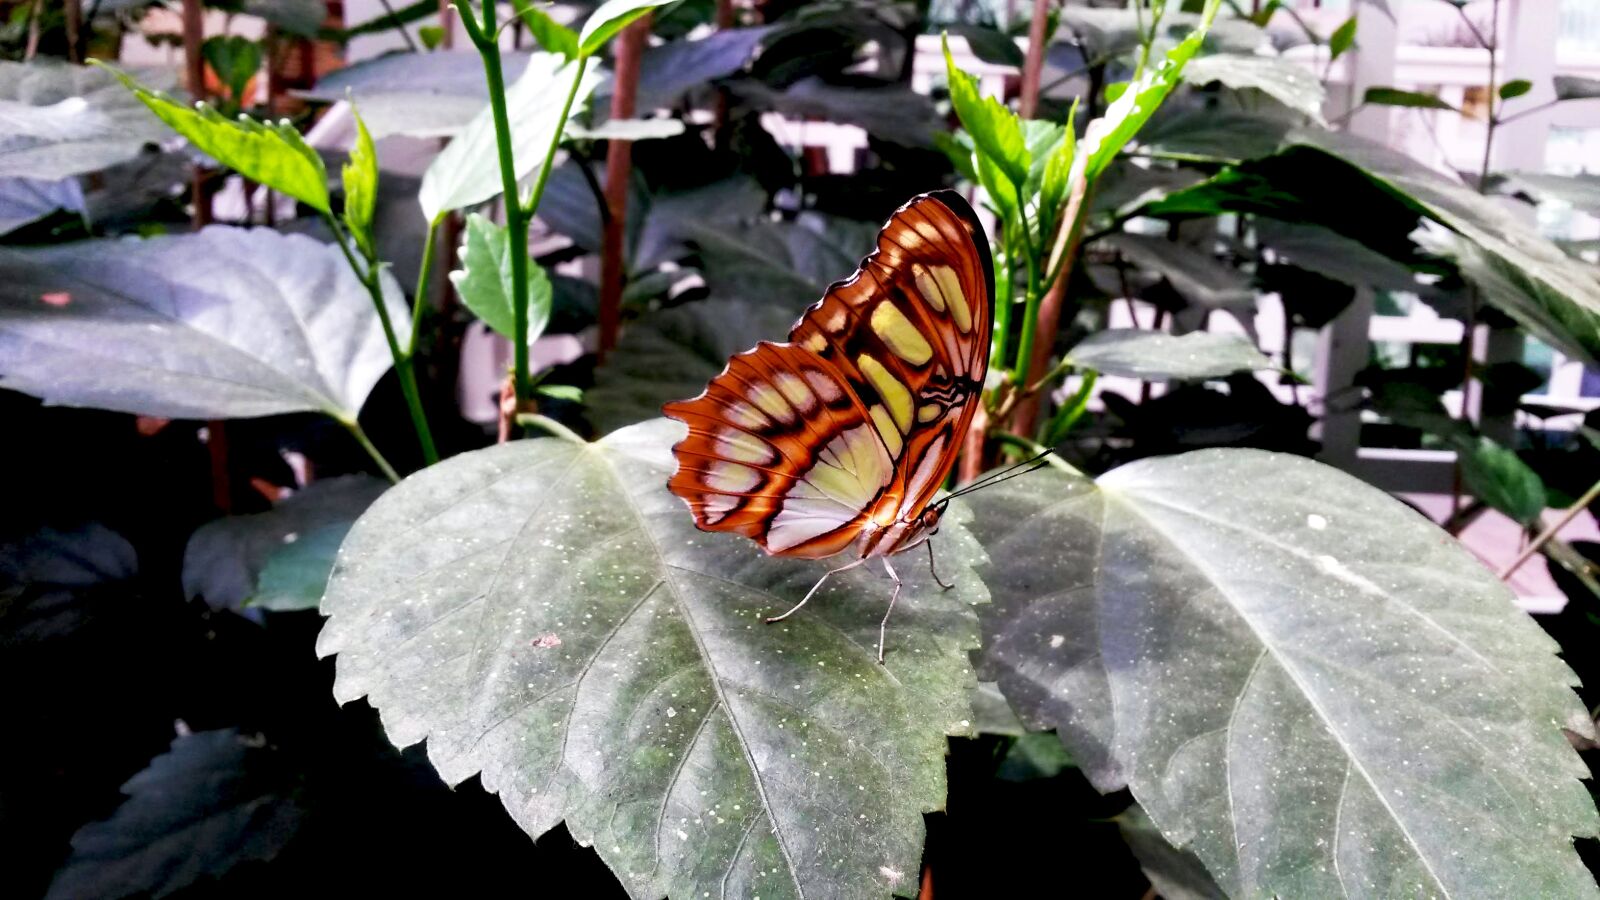 Samsung Galaxy S4 Mini sample photo. Butterfly, insect, nature photography